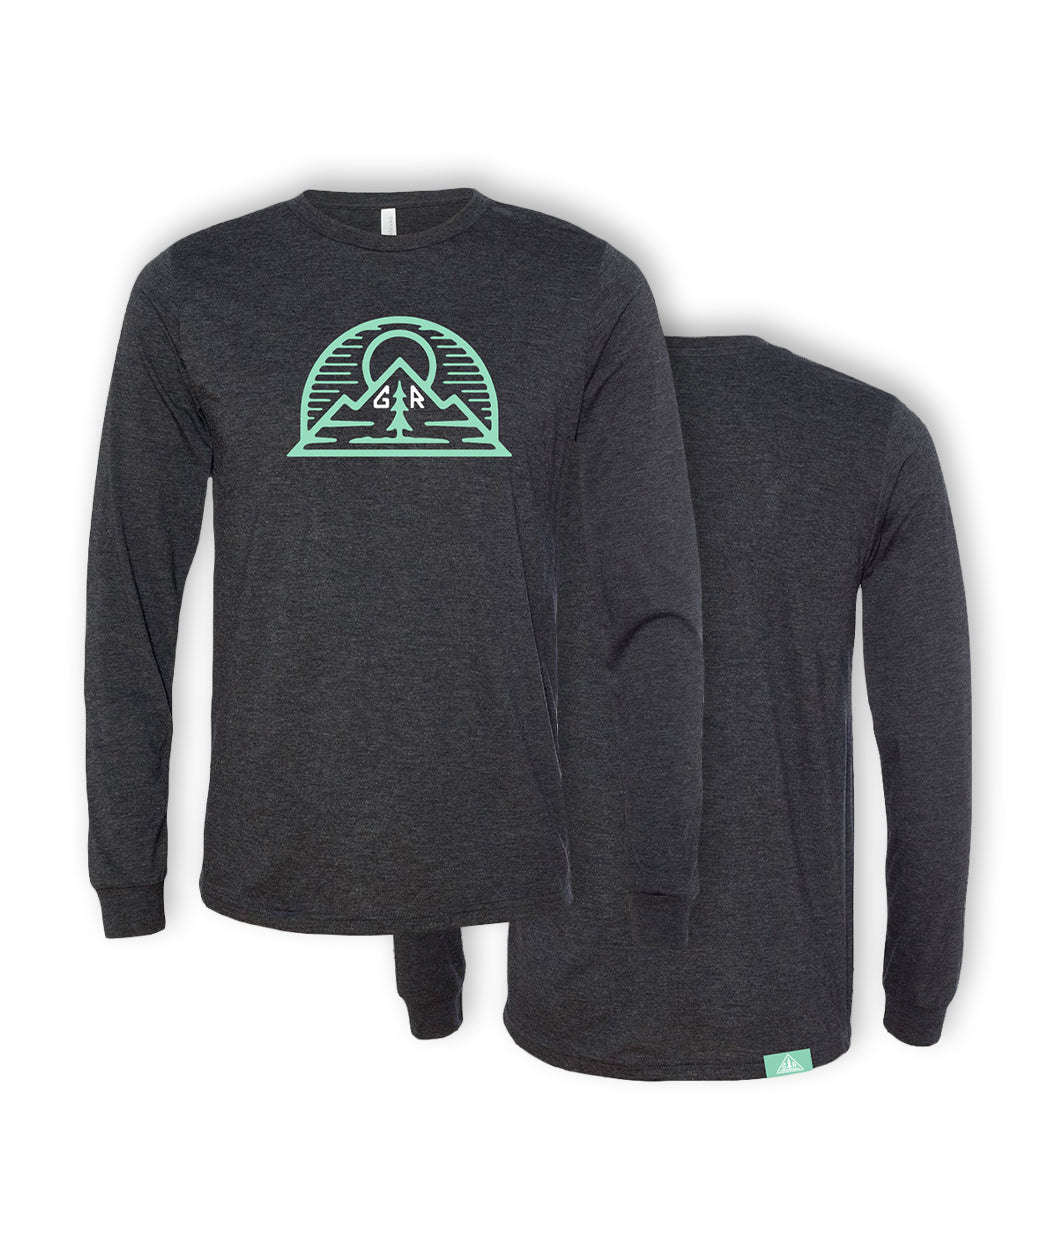 A gray long sleeve shirt. In the center, a green outline vector drawing of a sun rising above a mountain with a half circle around both. “G” and “R” are in white on either side of a green tree - from the Ginger Runner